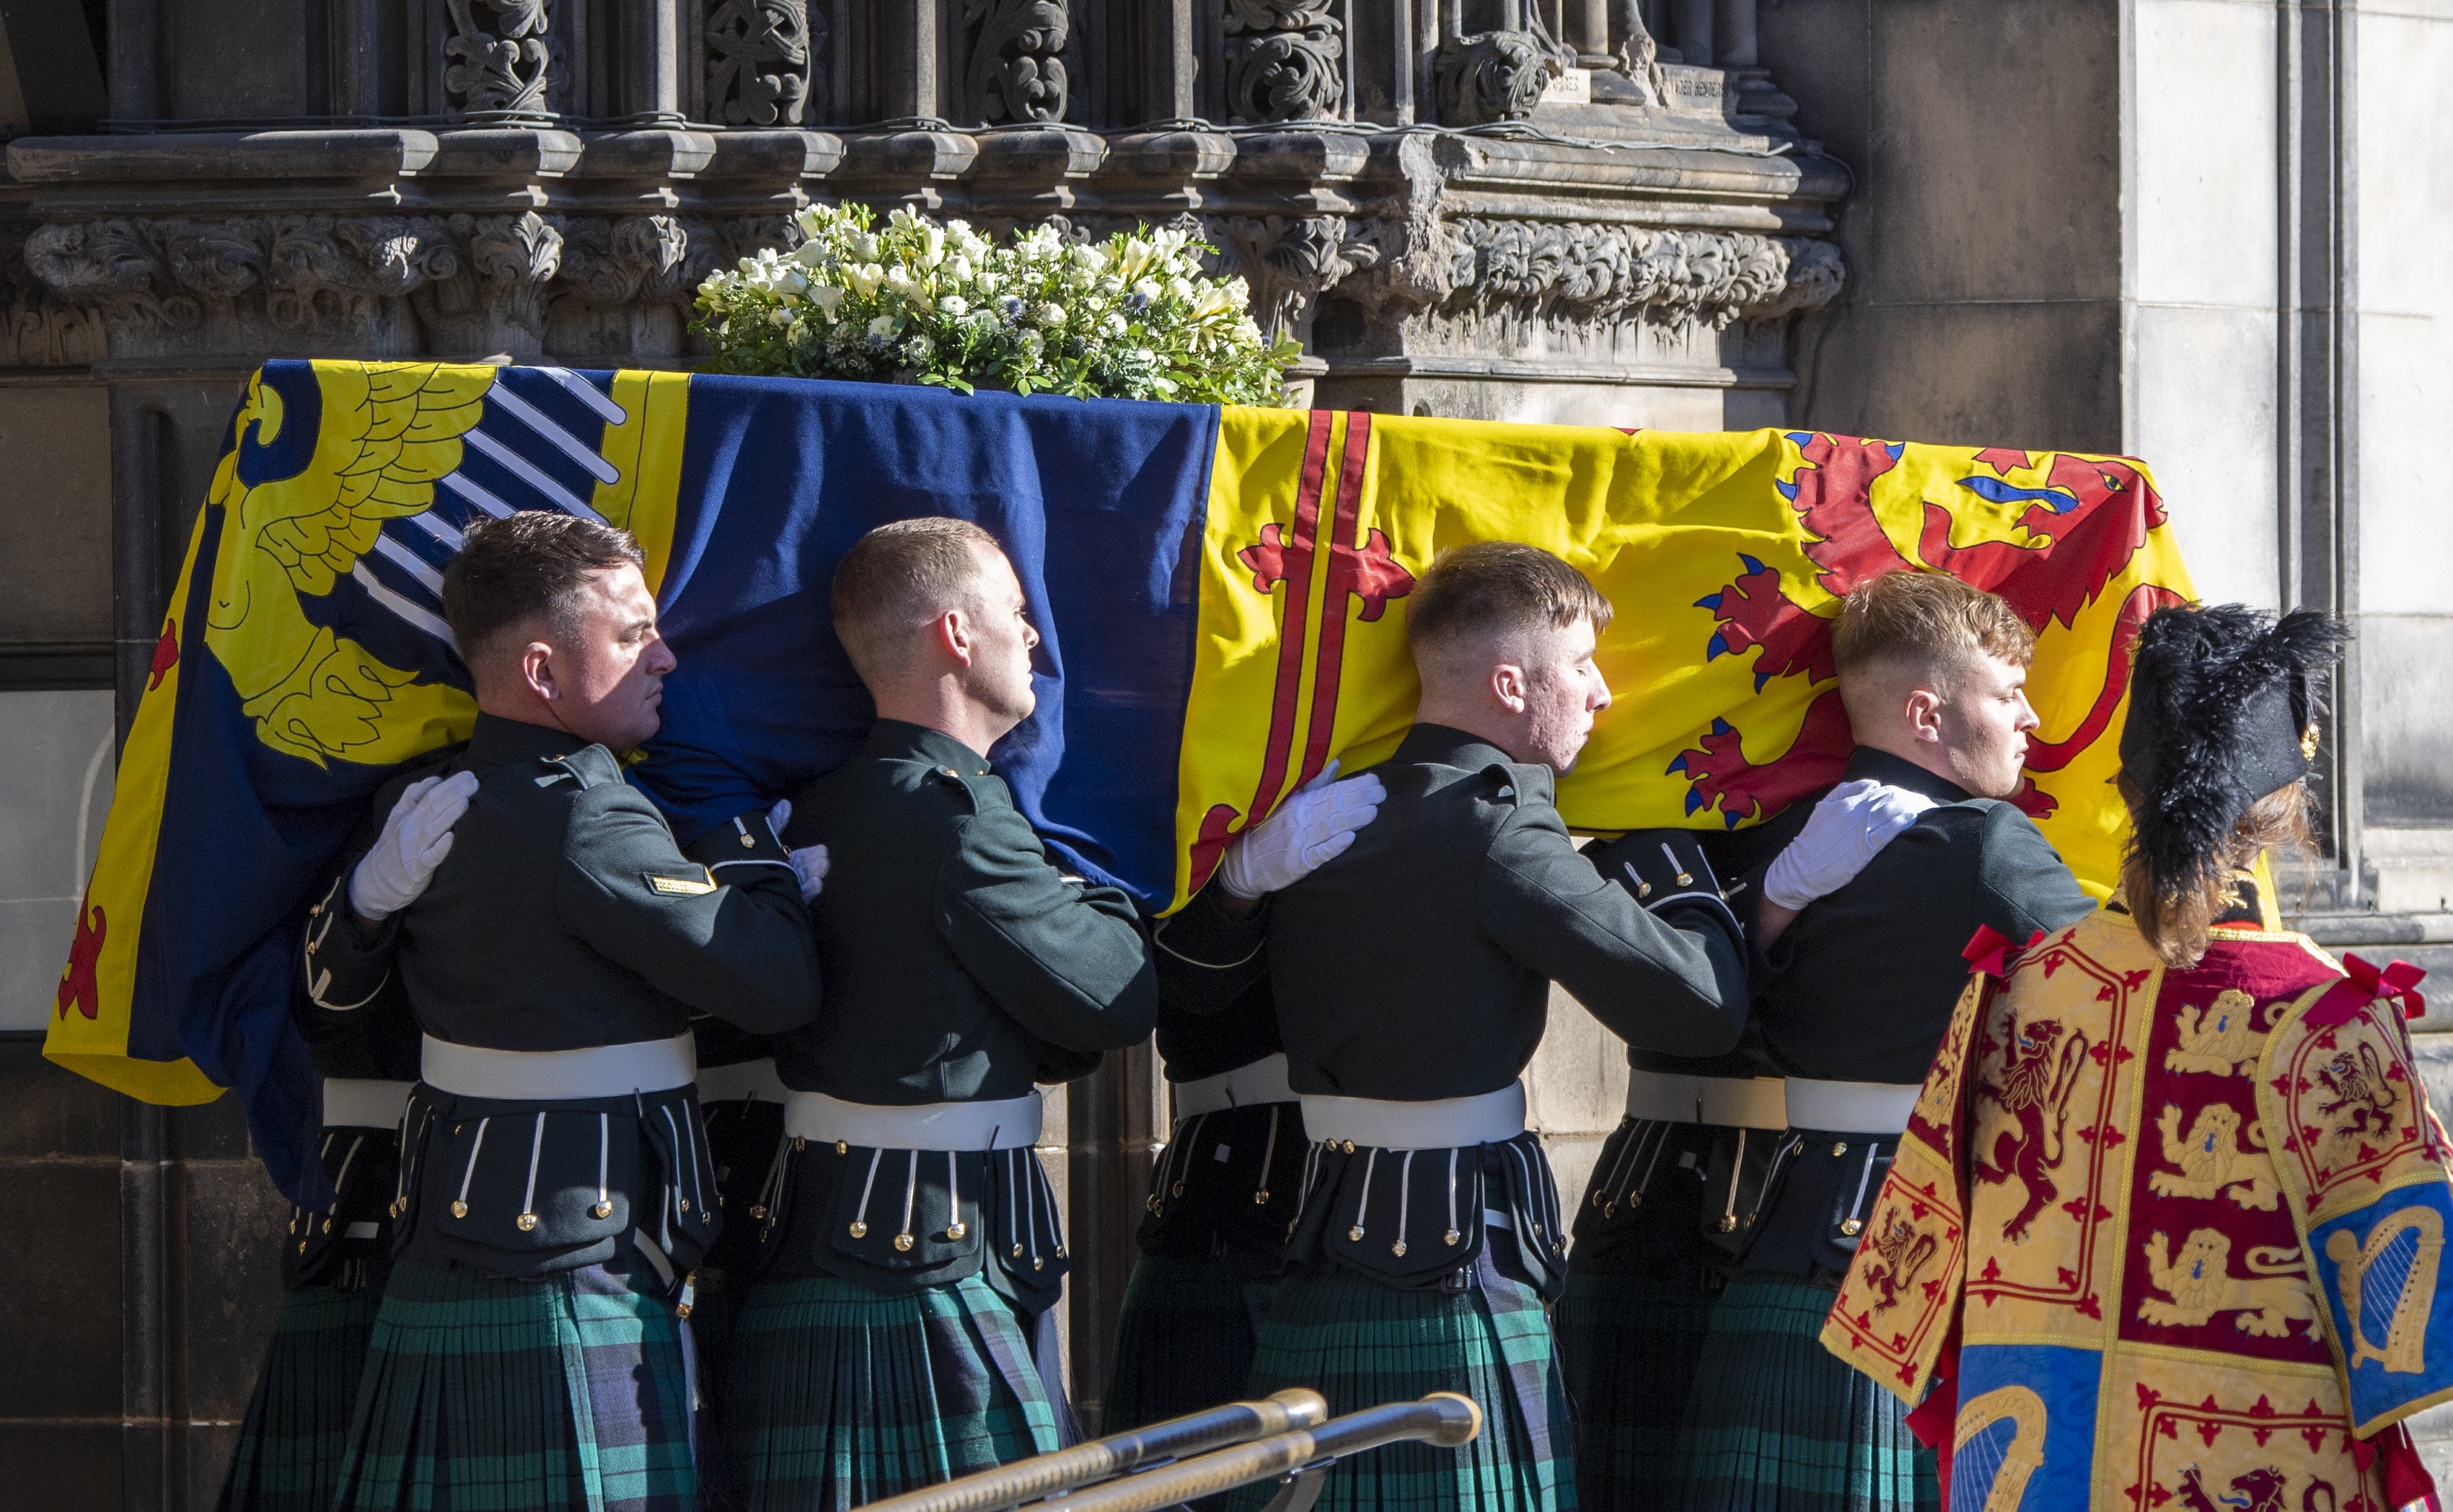 The Queen’s coffin left Edinburgh for London on Tuesday (Lesley Martin/PA)